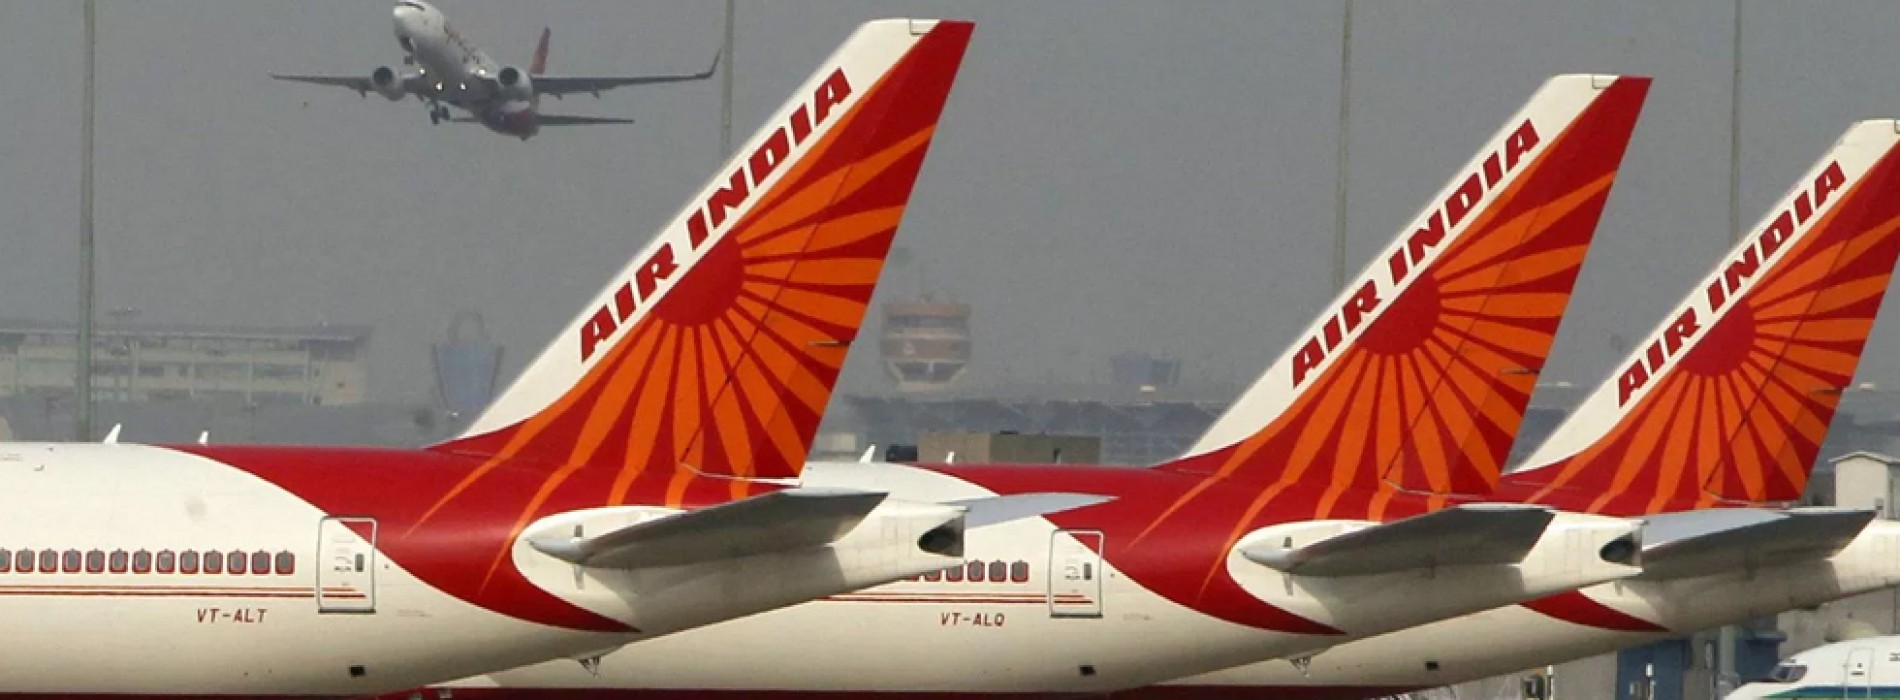 Air India sale: Govt invites bids to appoint banks and lawyers to oversee disinvestment